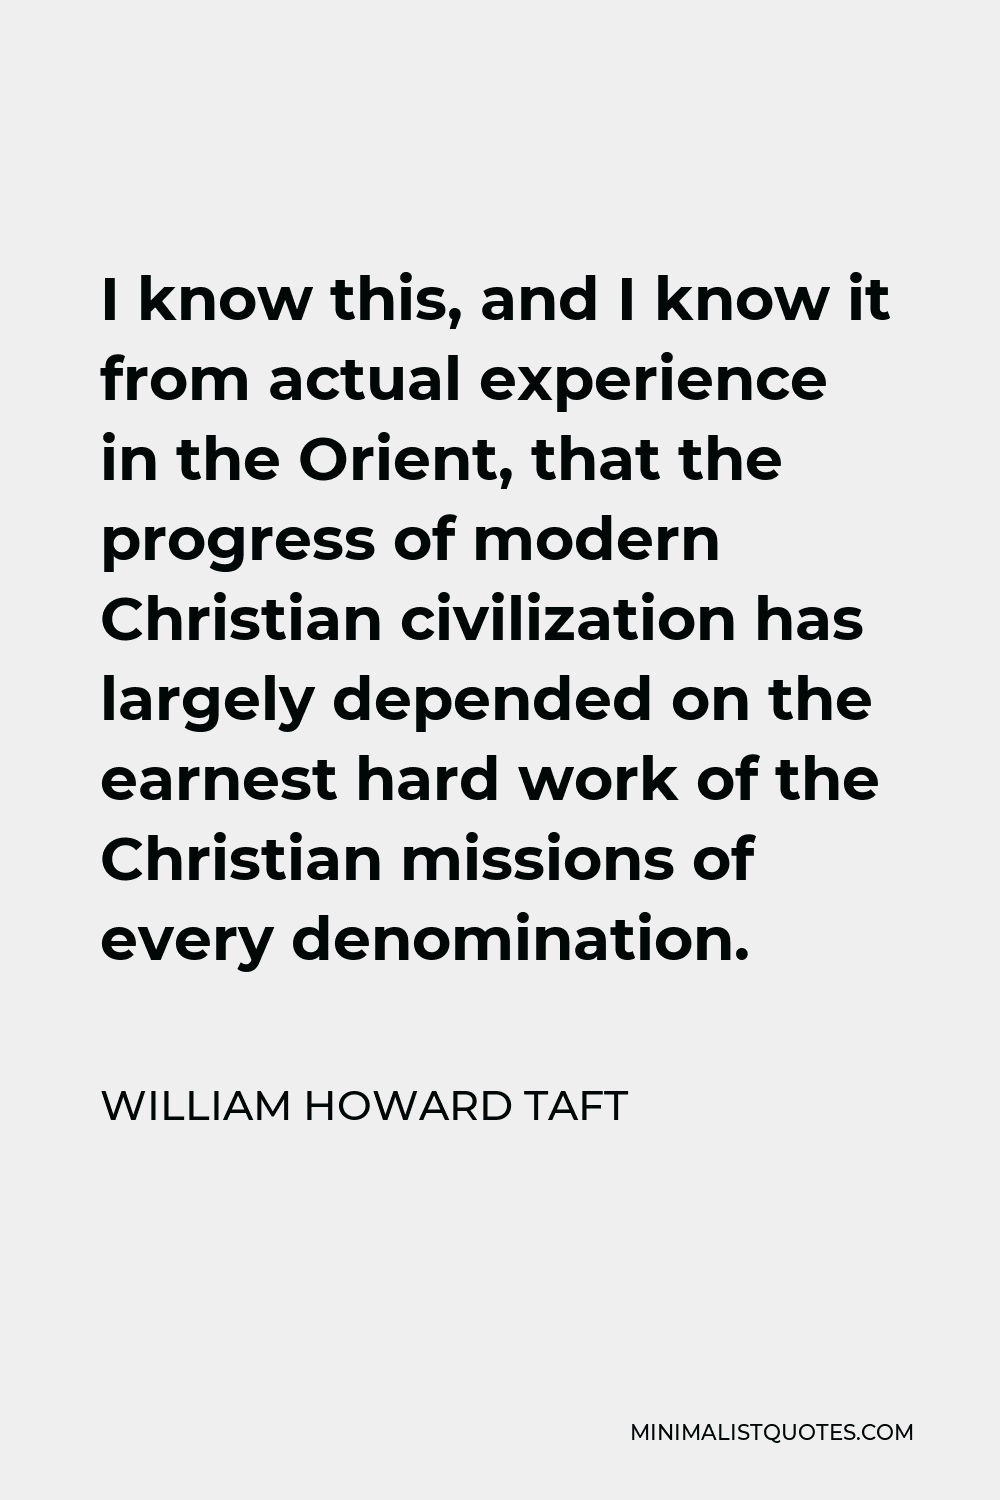 William Howard Taft Quote - I know this, and I know it from actual experience in the Orient, that the progress of modern Christian civilization has largely depended on the earnest hard work of the Christian missions of every denomination.